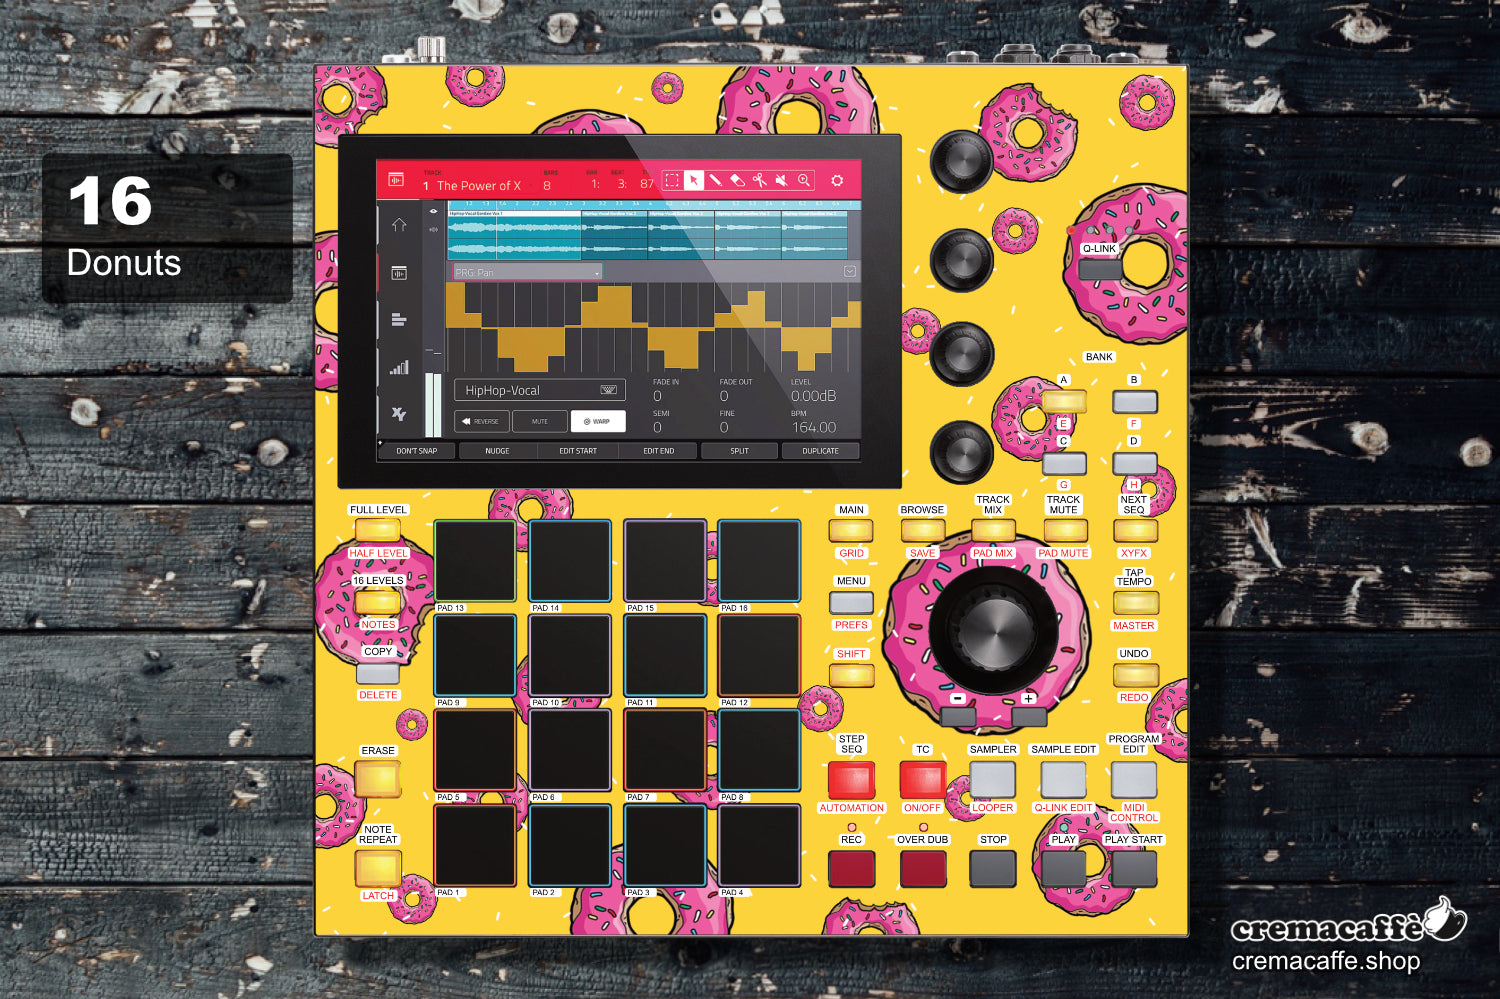 MPC ONE  Skin: Donuts - Cremacaffe Design